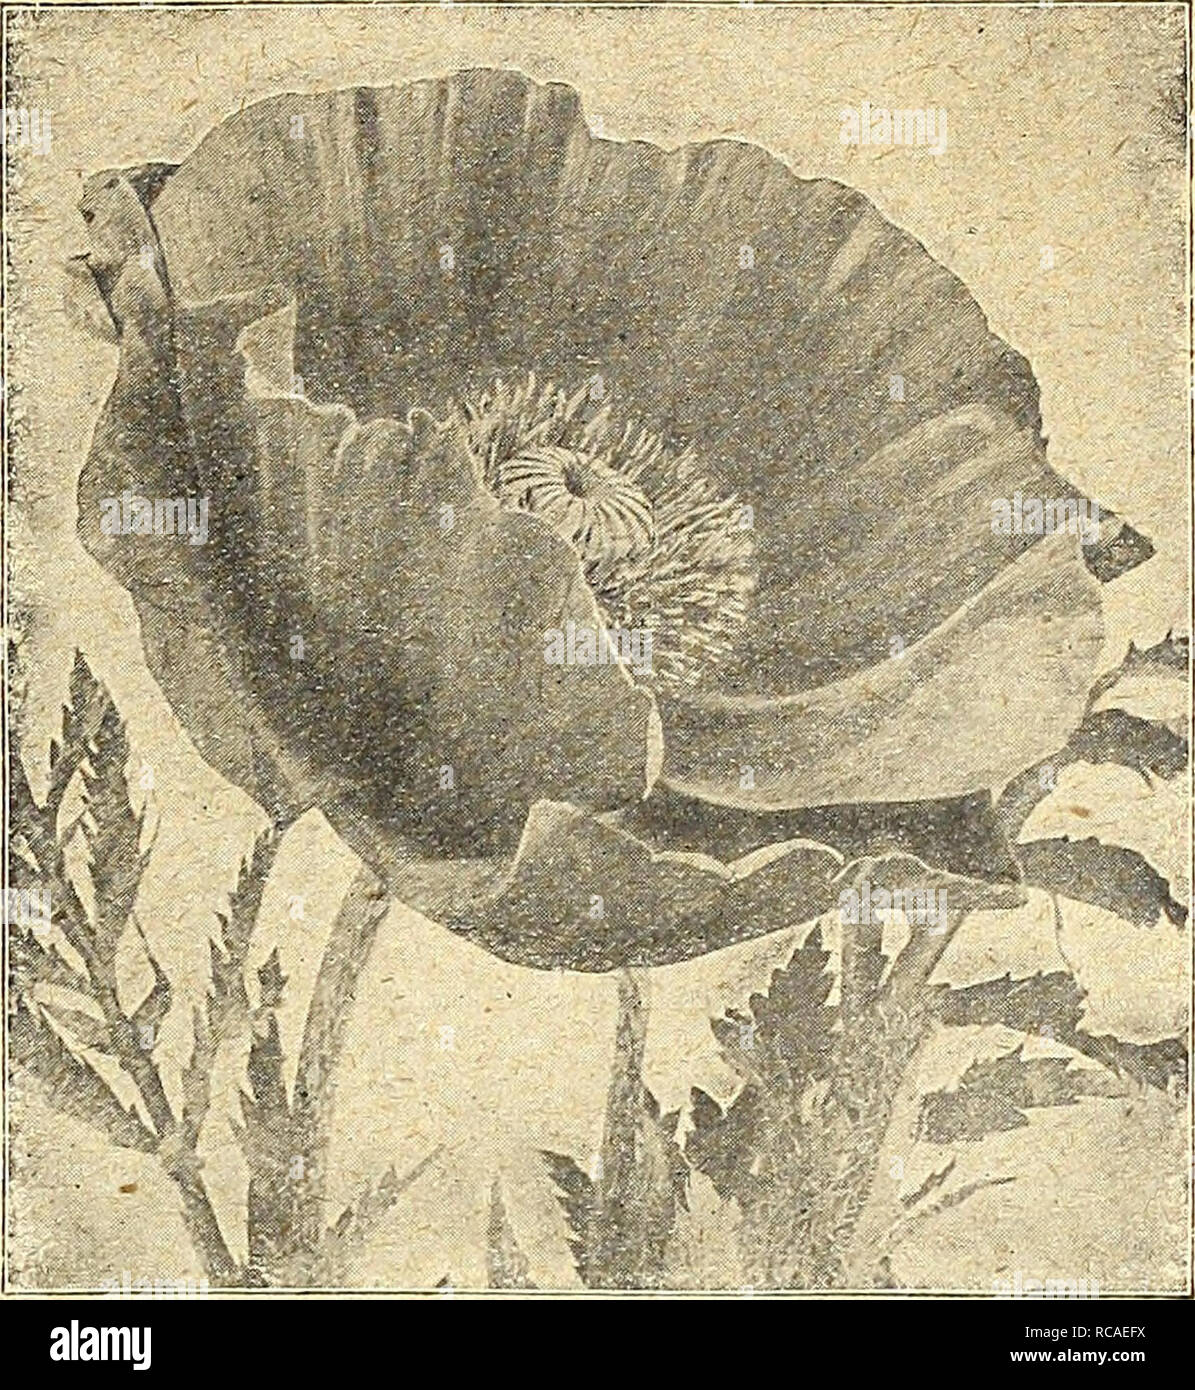 . Dreer's autumn catalogue 1924. Bulbs (Plants) Catalogs; Flowers Seeds Catalogs; Gardening Equipment and supplies Catalogs; Nurseries (Horticulture) Catalogs; Vegetables Seeds Catalogs. /flEHRyAMm^ lELMBLEFMWER SEEDS. 73 PhySOStegia (False Dragon Head) PER PICT. 3651 Virginica. One of the prettiest hardy perennials, and gaining in popularity as it becomes better known. It forms dense bushes 3 to 4 feet high, bearing freely during the summer months spikes of delicate pink tubular flowers not unlike a gigantic heather $0 10 3652 — Alba. A pretty white-flowered form of the above, 10 Platycodon ( Stock Photo